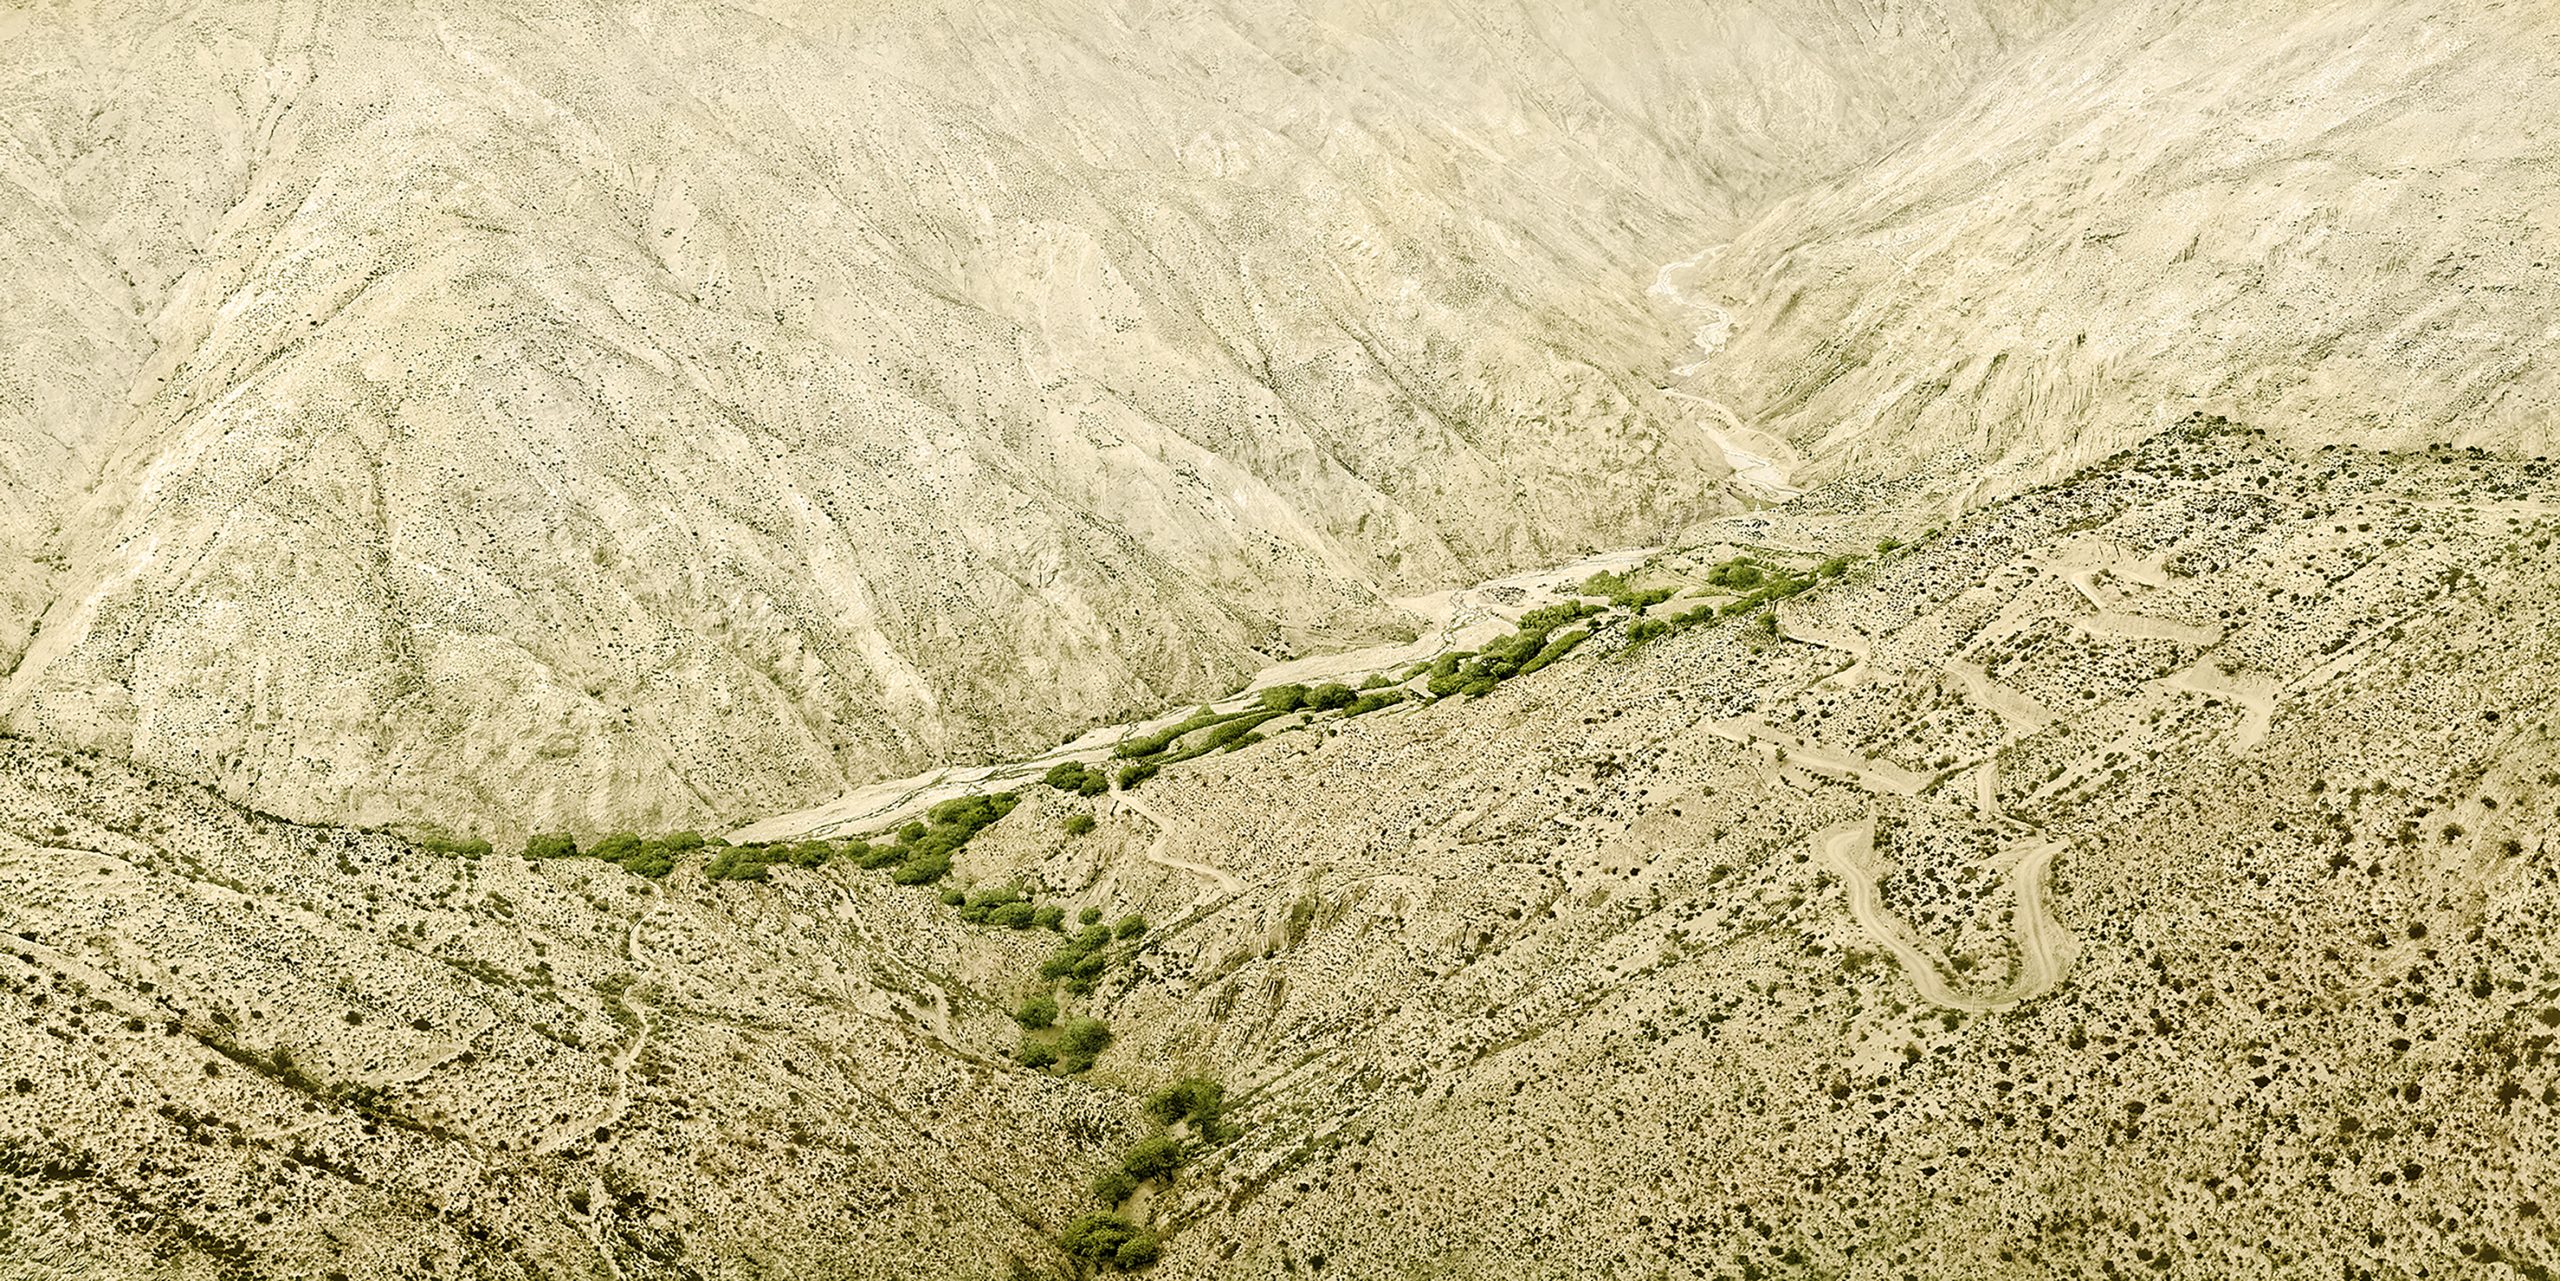 ©Irene Kung. Landscape Yunnan 2 / The road to self-awareness, 2021 D-print on rag paper Edition of 8 200 x 100 cm